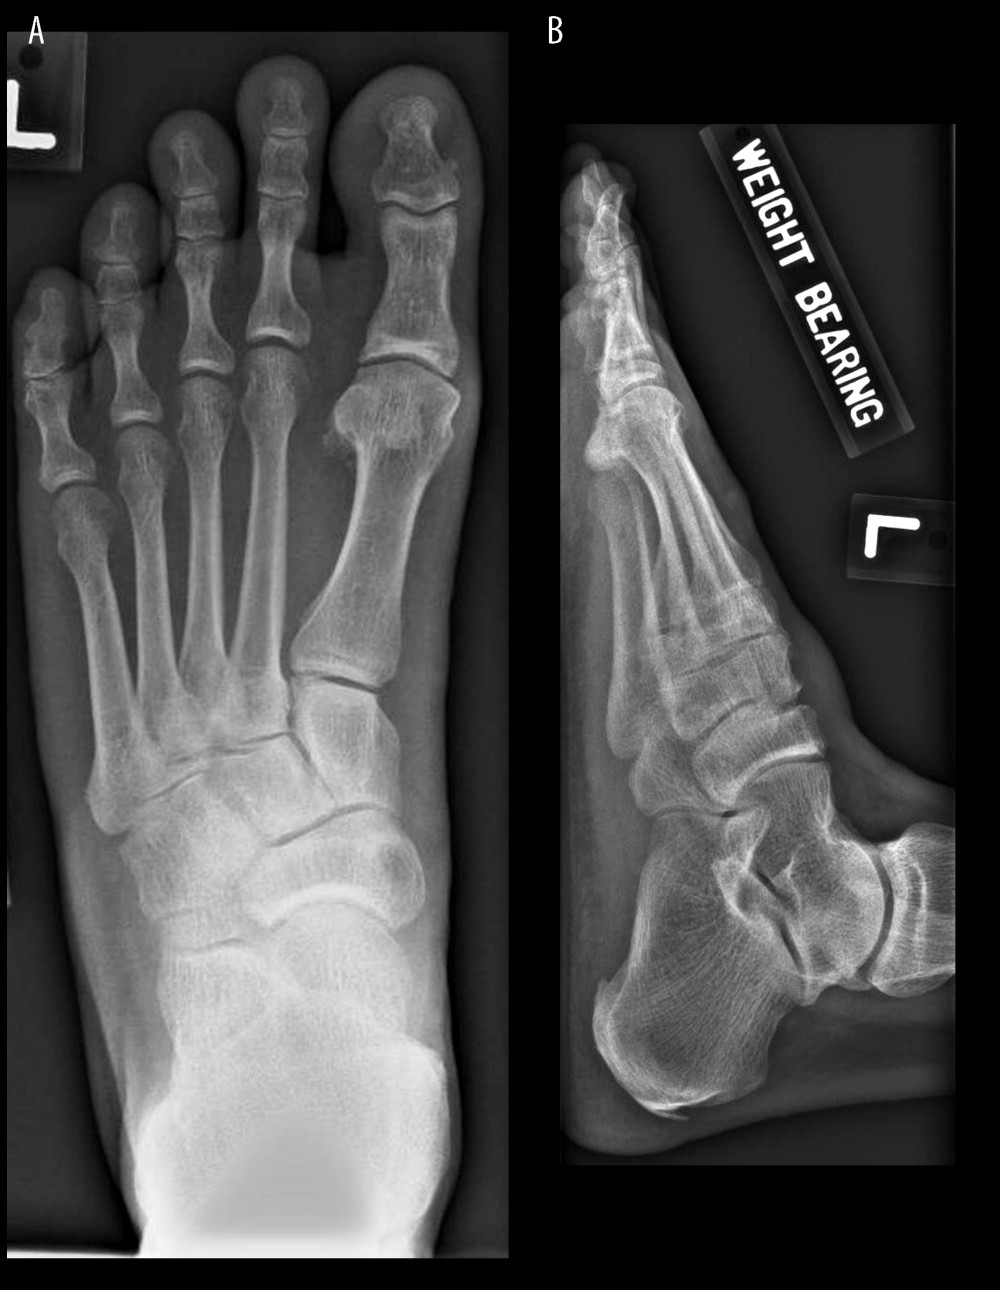 Plain radiograph of the left foot showing mild degenerative changes in 1st metatarsophalangeal joint. (A) dorsoplantar view, (B) lateral view.